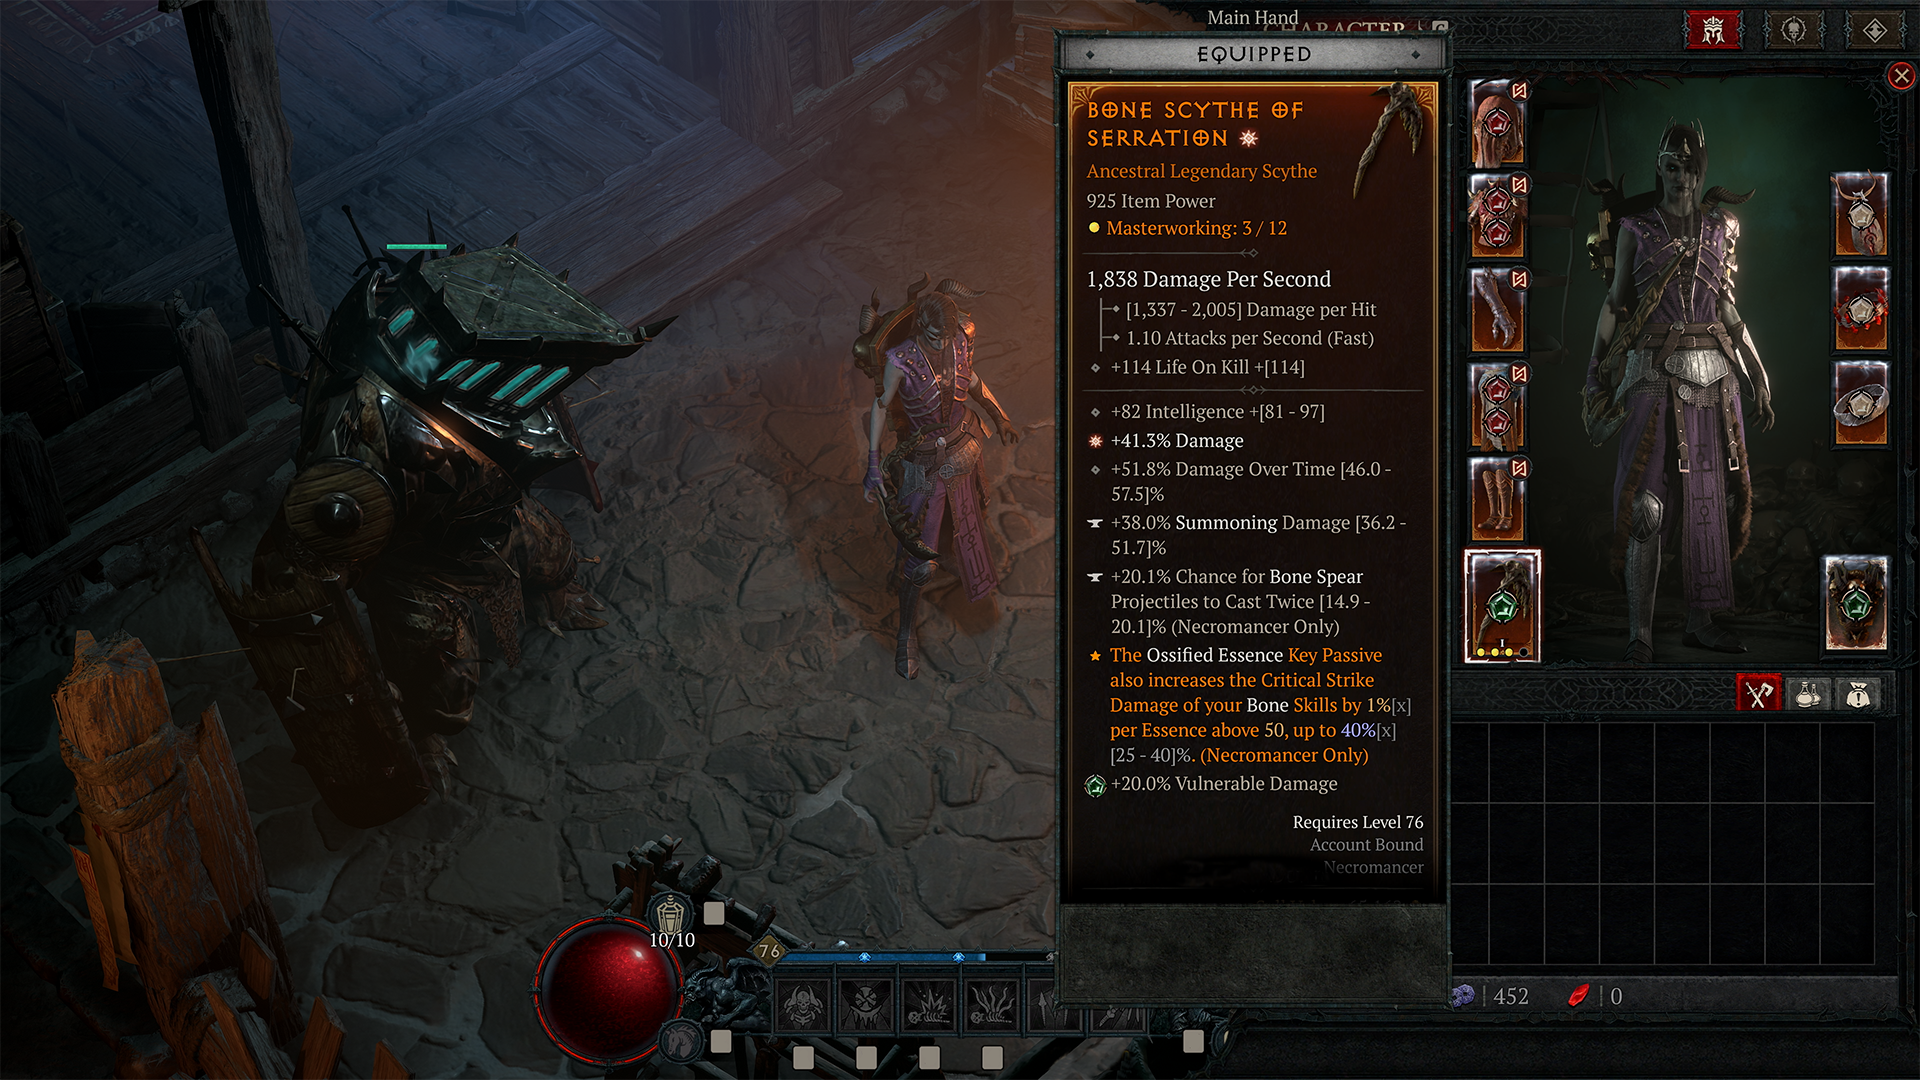 This screenshot displays an item under the Itemization changes with a Greater Affix.